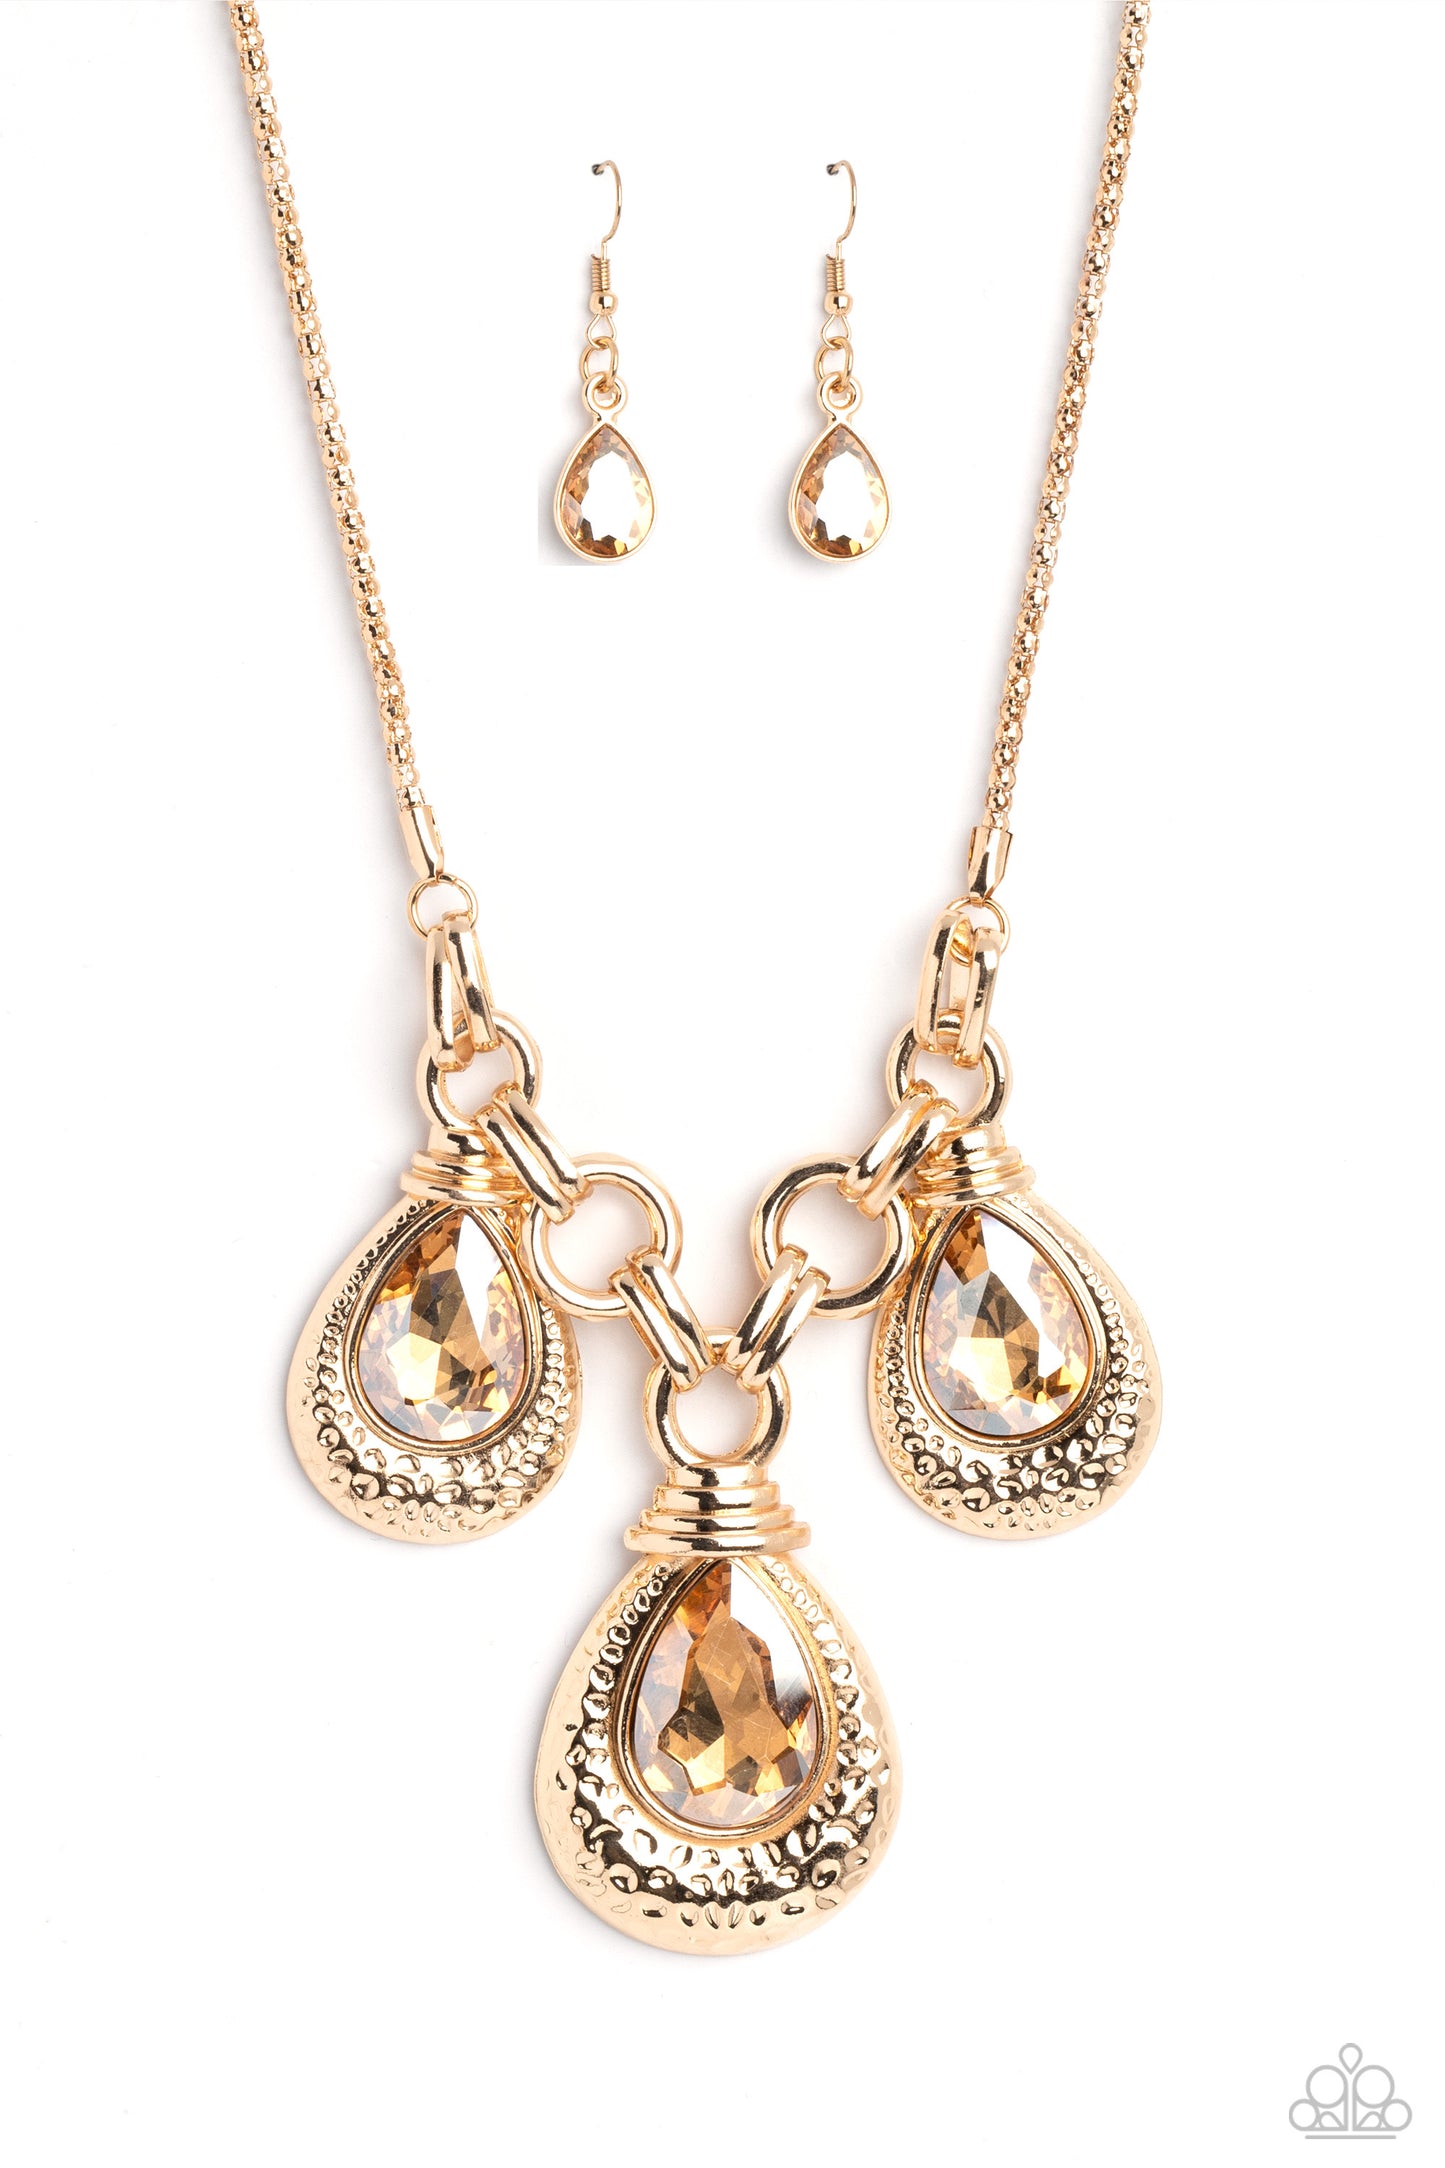 Paparazzi 2pc set: Built Beacon - Gold Necklace & Crafted Coals - Gold Bracelet - Bling Jewelry